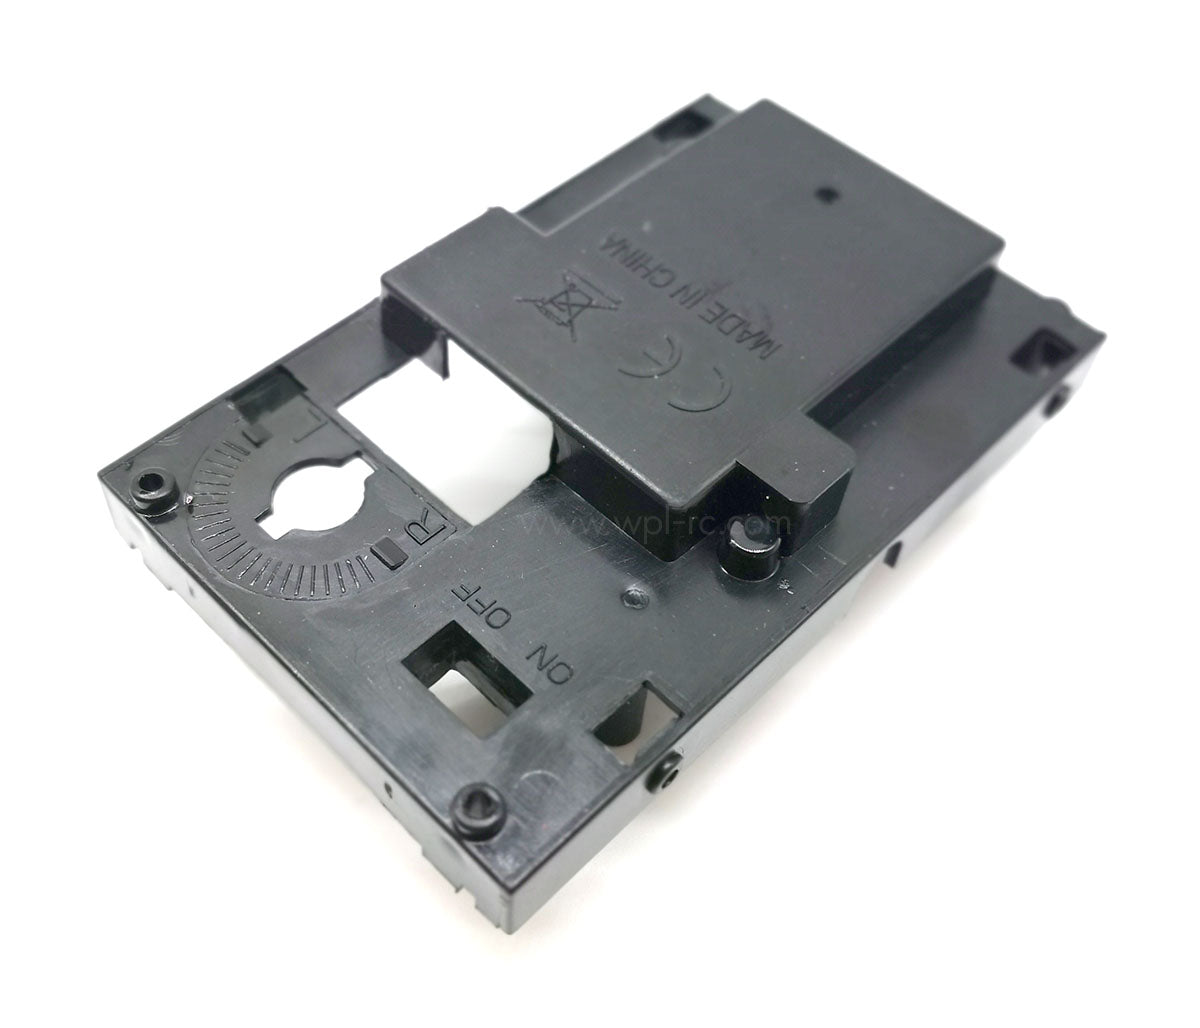 C14 C24 & All B Series Servo Mount Tray - WPL RC Official Store